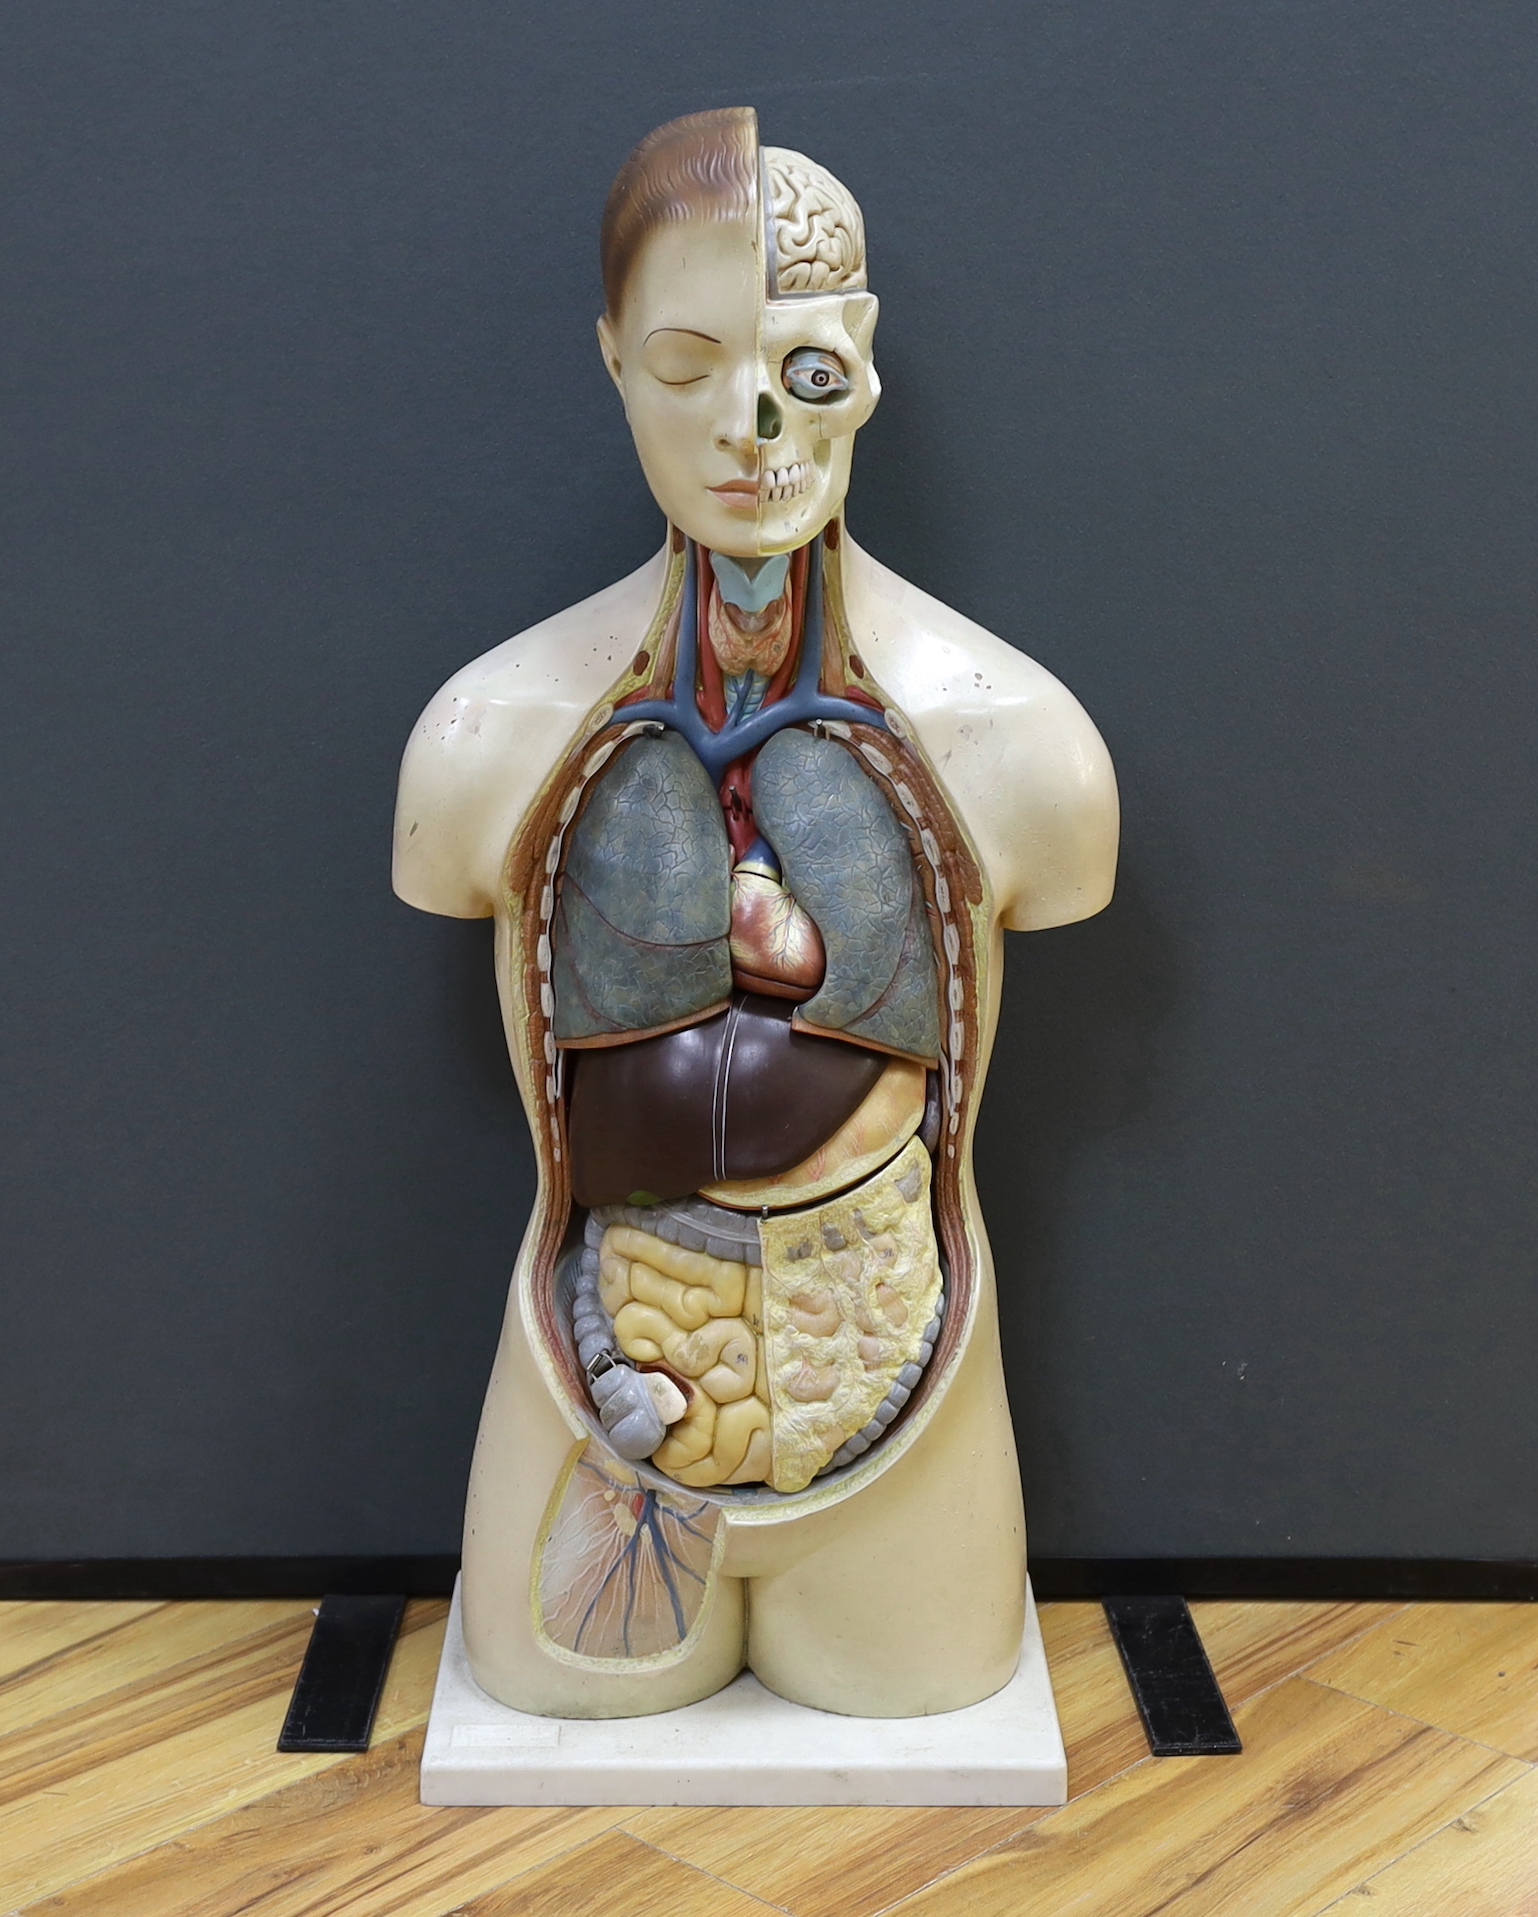 A 1950s/60s medical school educational plastic and painted composite anatomical model on base by E.